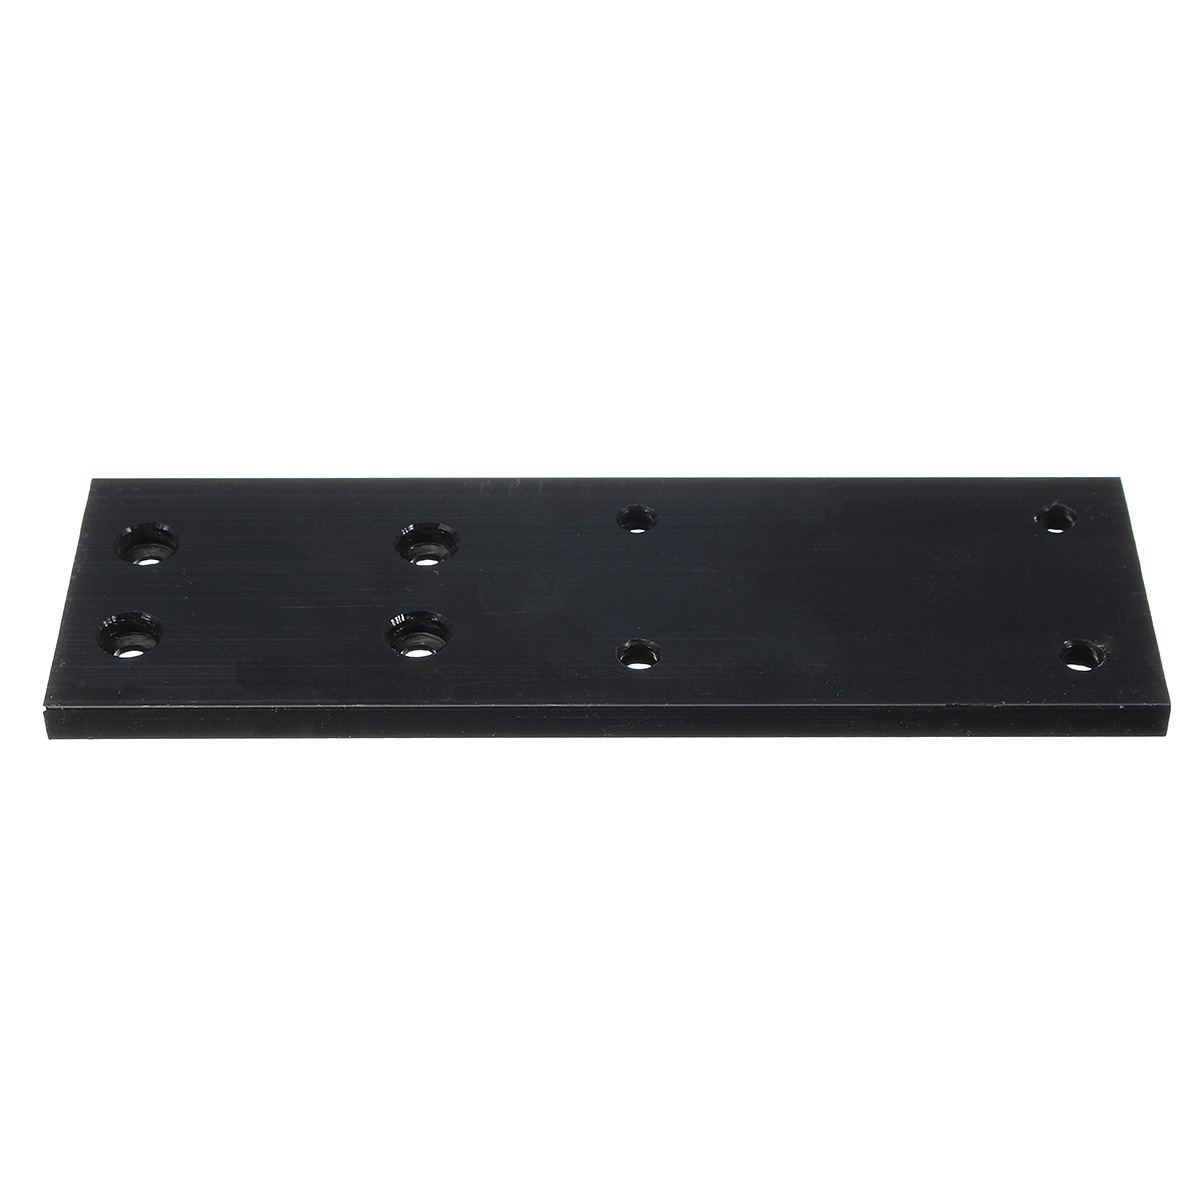 150506mm-Motor-Slide-Connection-Plate-Electric-Linear-Sliding-Table-XY-Axis-Pinboard-Board-1297972-3